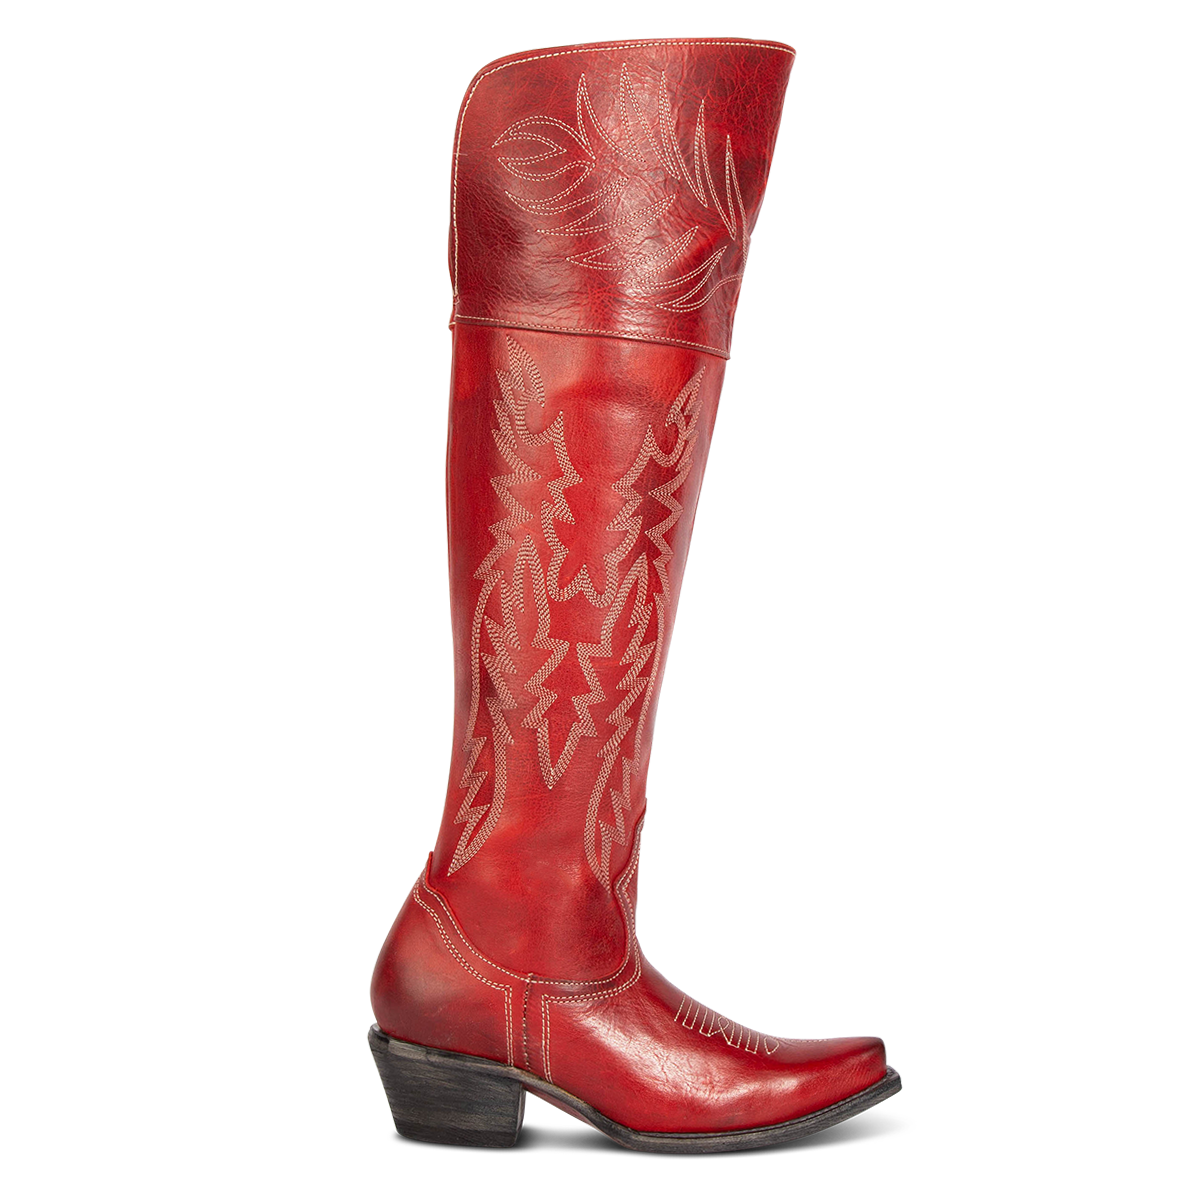 FREEBIRD women's Wynonna red leather tall western boot with stitch detailing and snip toe construction